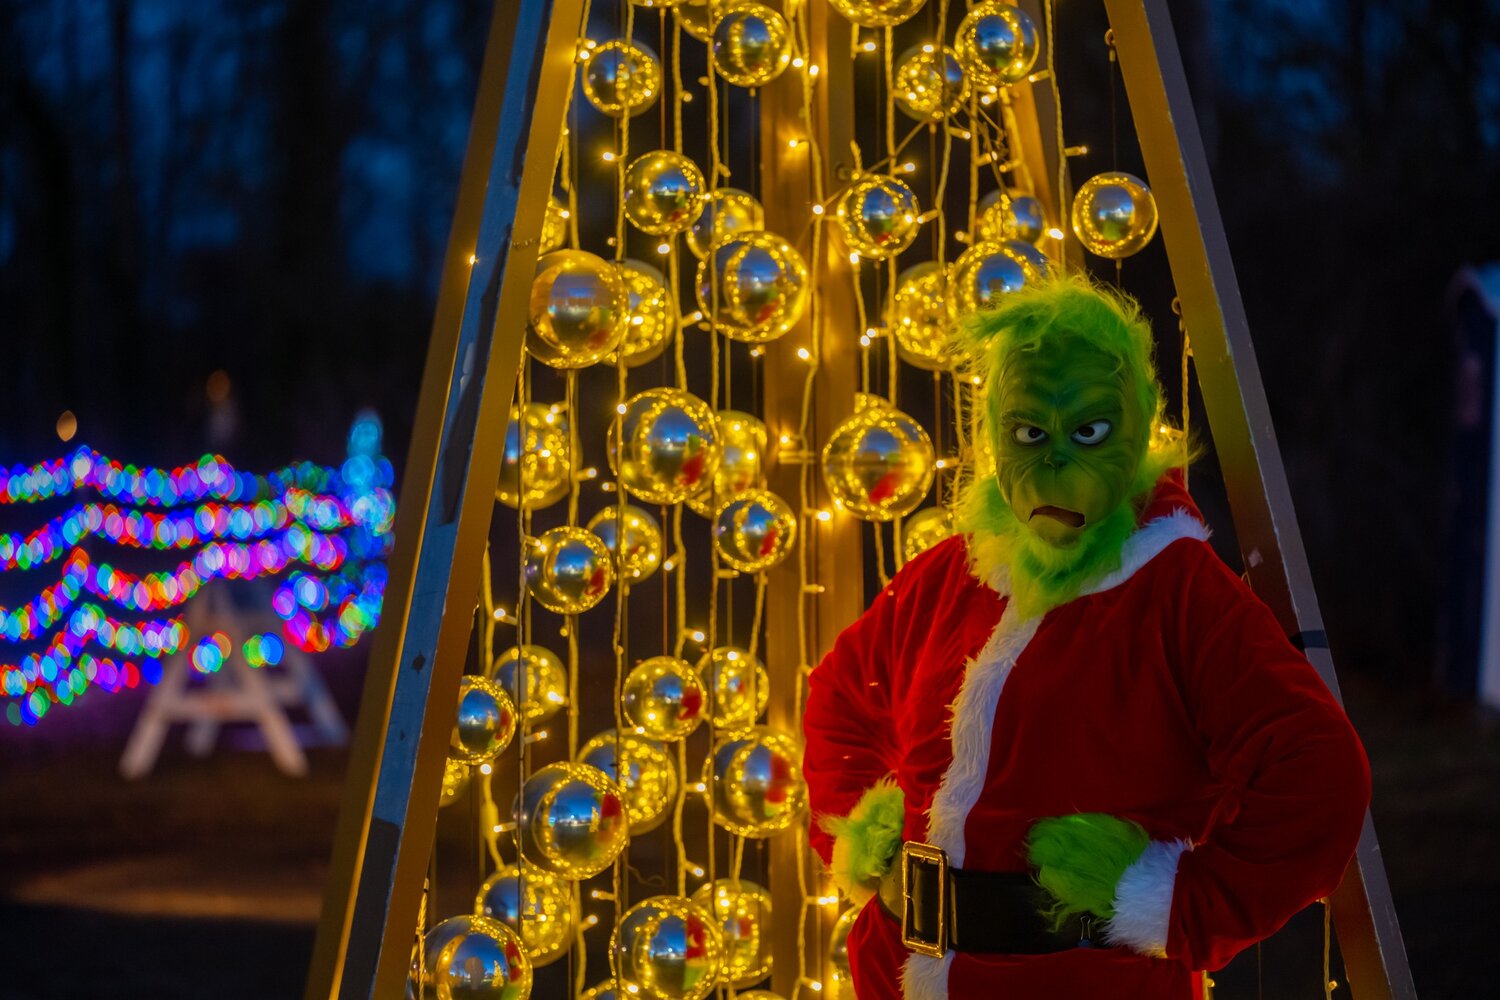 Not even The Grinch can diminish the holiday cheer in the Town of Islip during the holiday season.